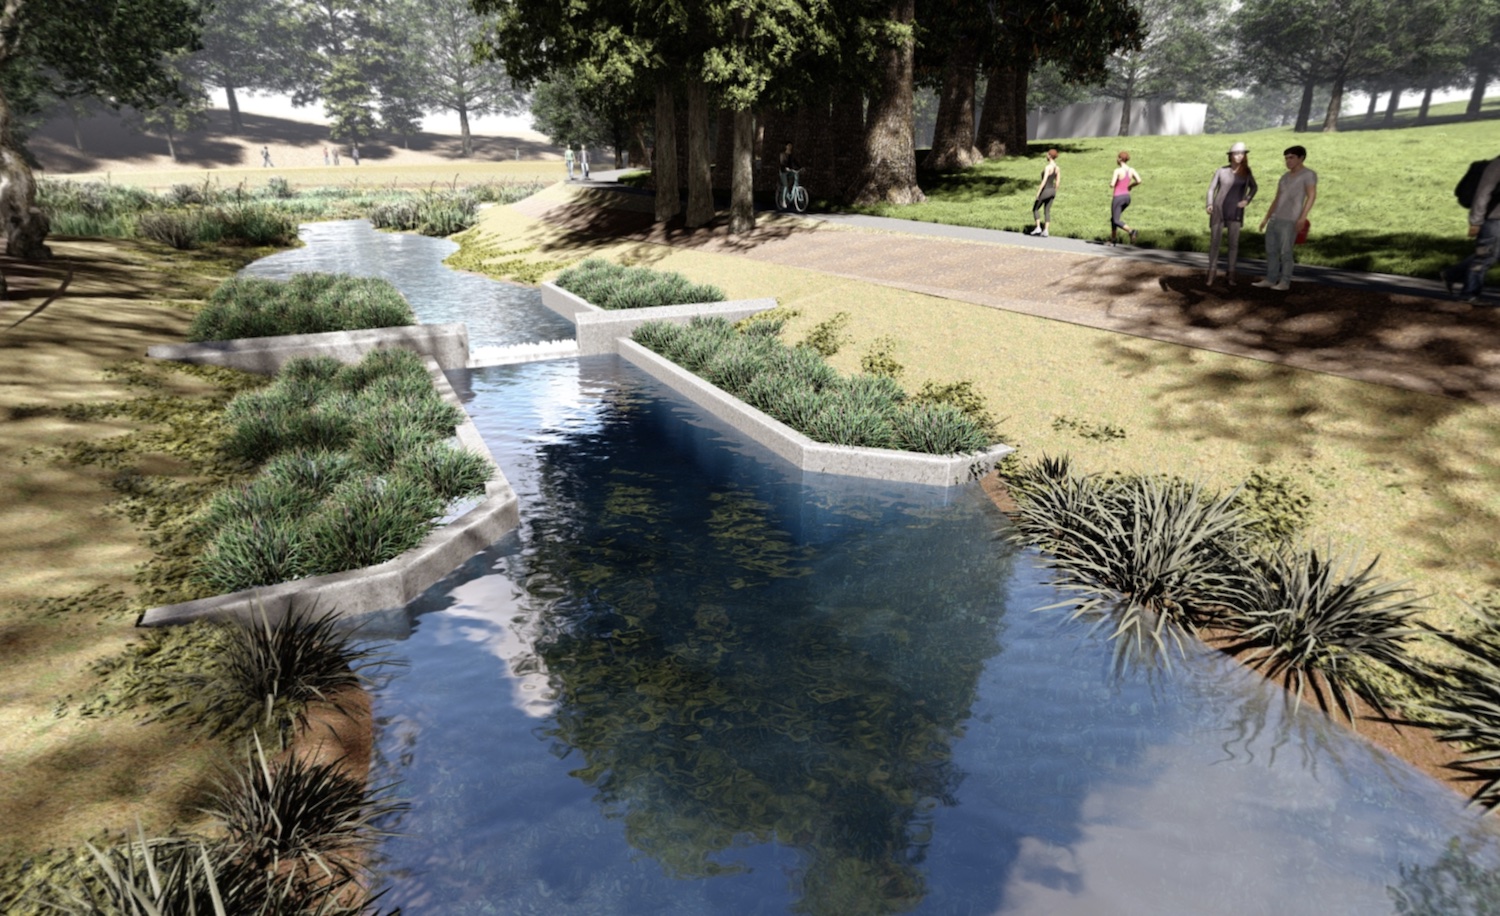 Rendering of a weir that will be installed Arboretum waterway